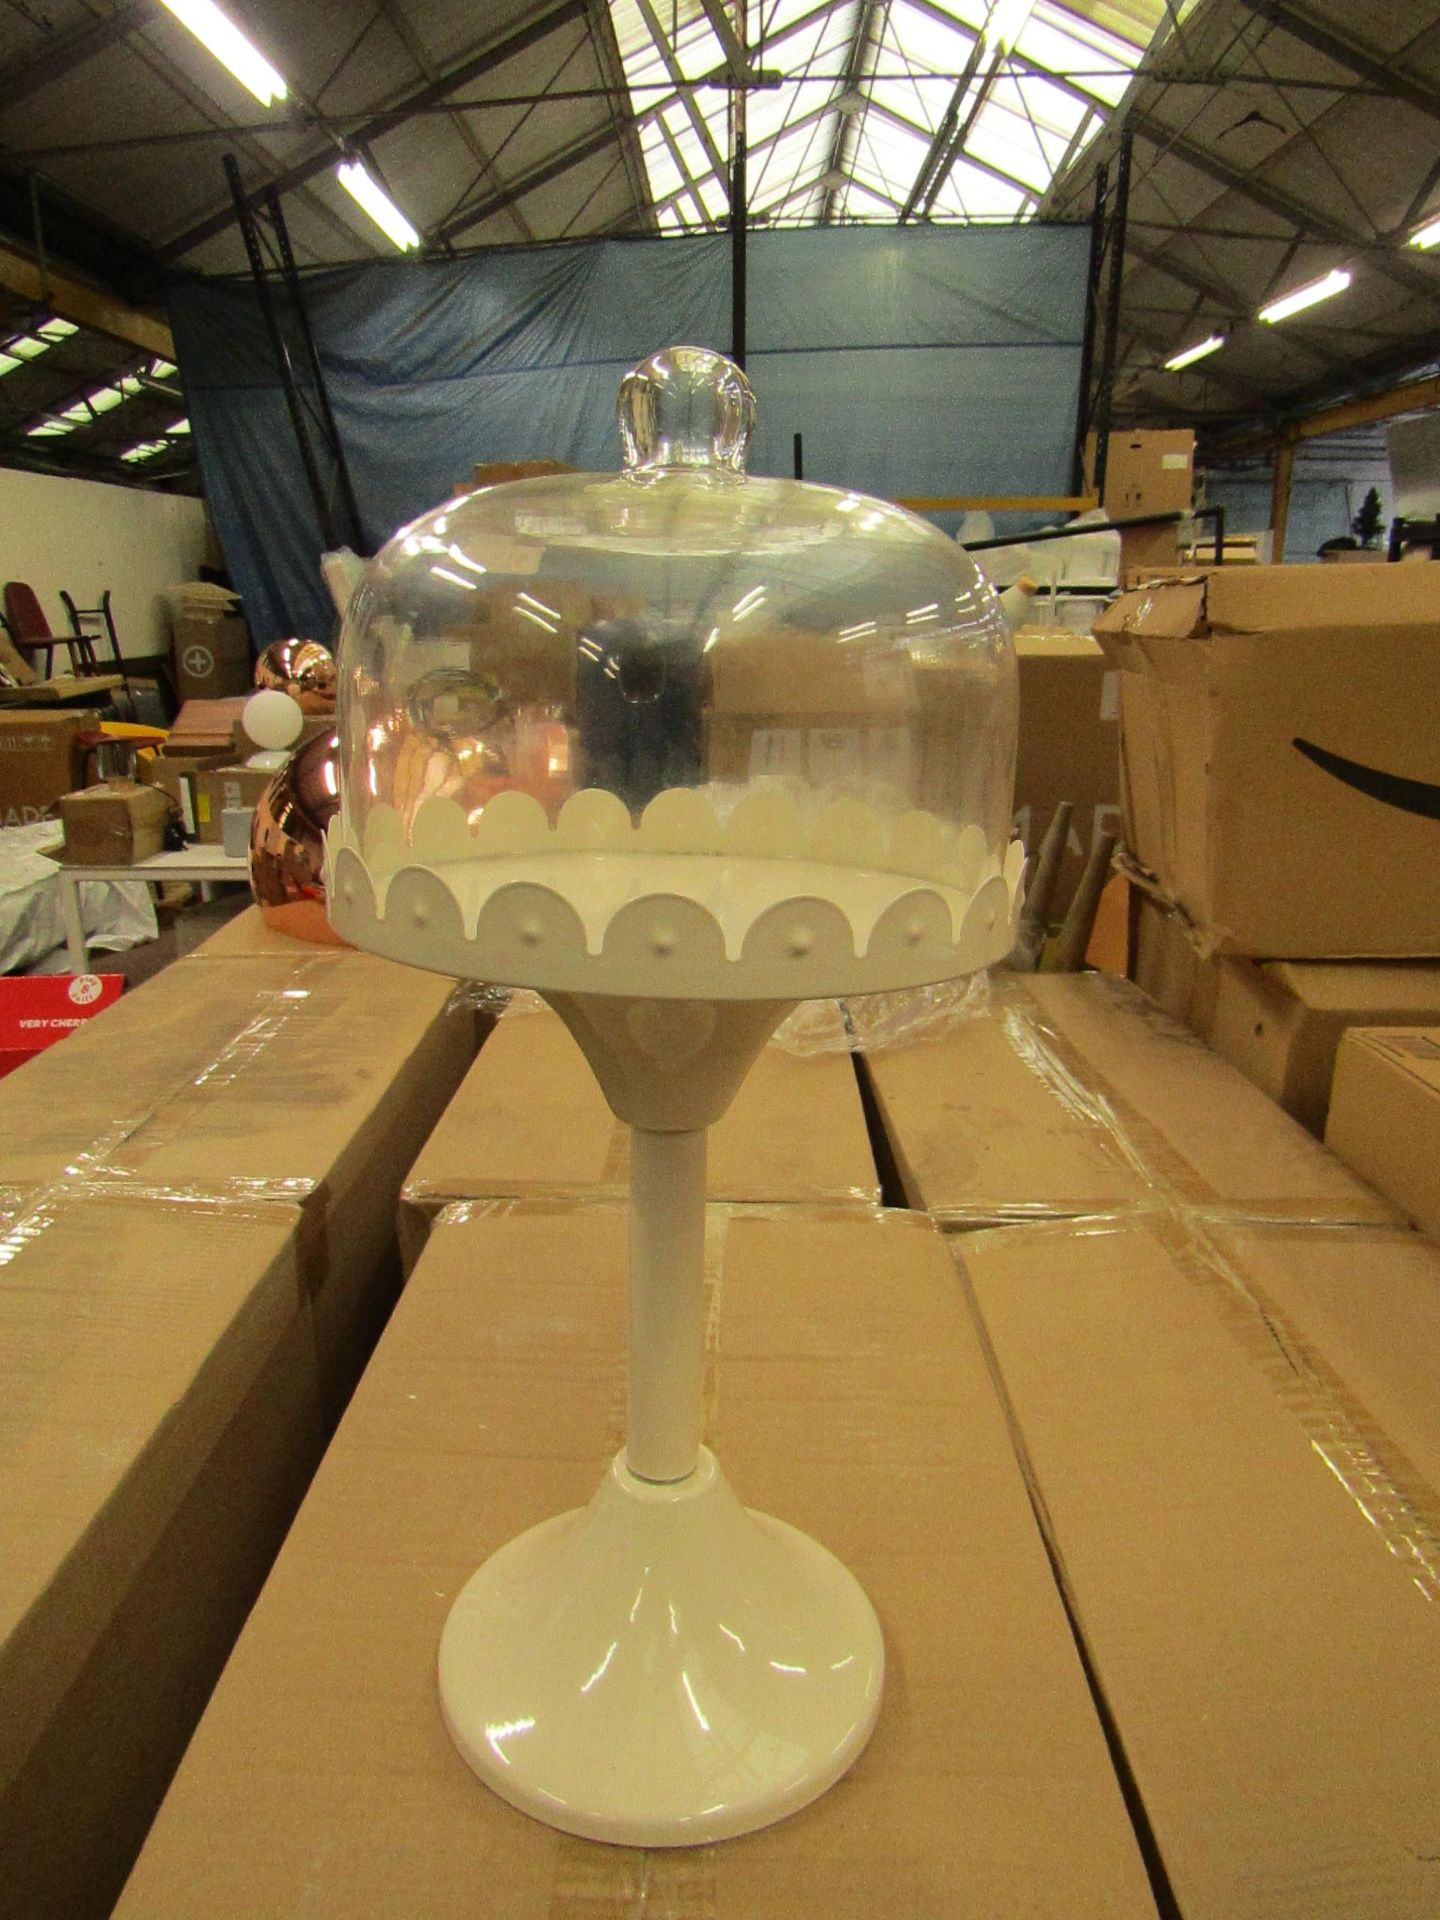 1 x GR8 Home - Cake Stand with Glass Cover - New & Boxed.